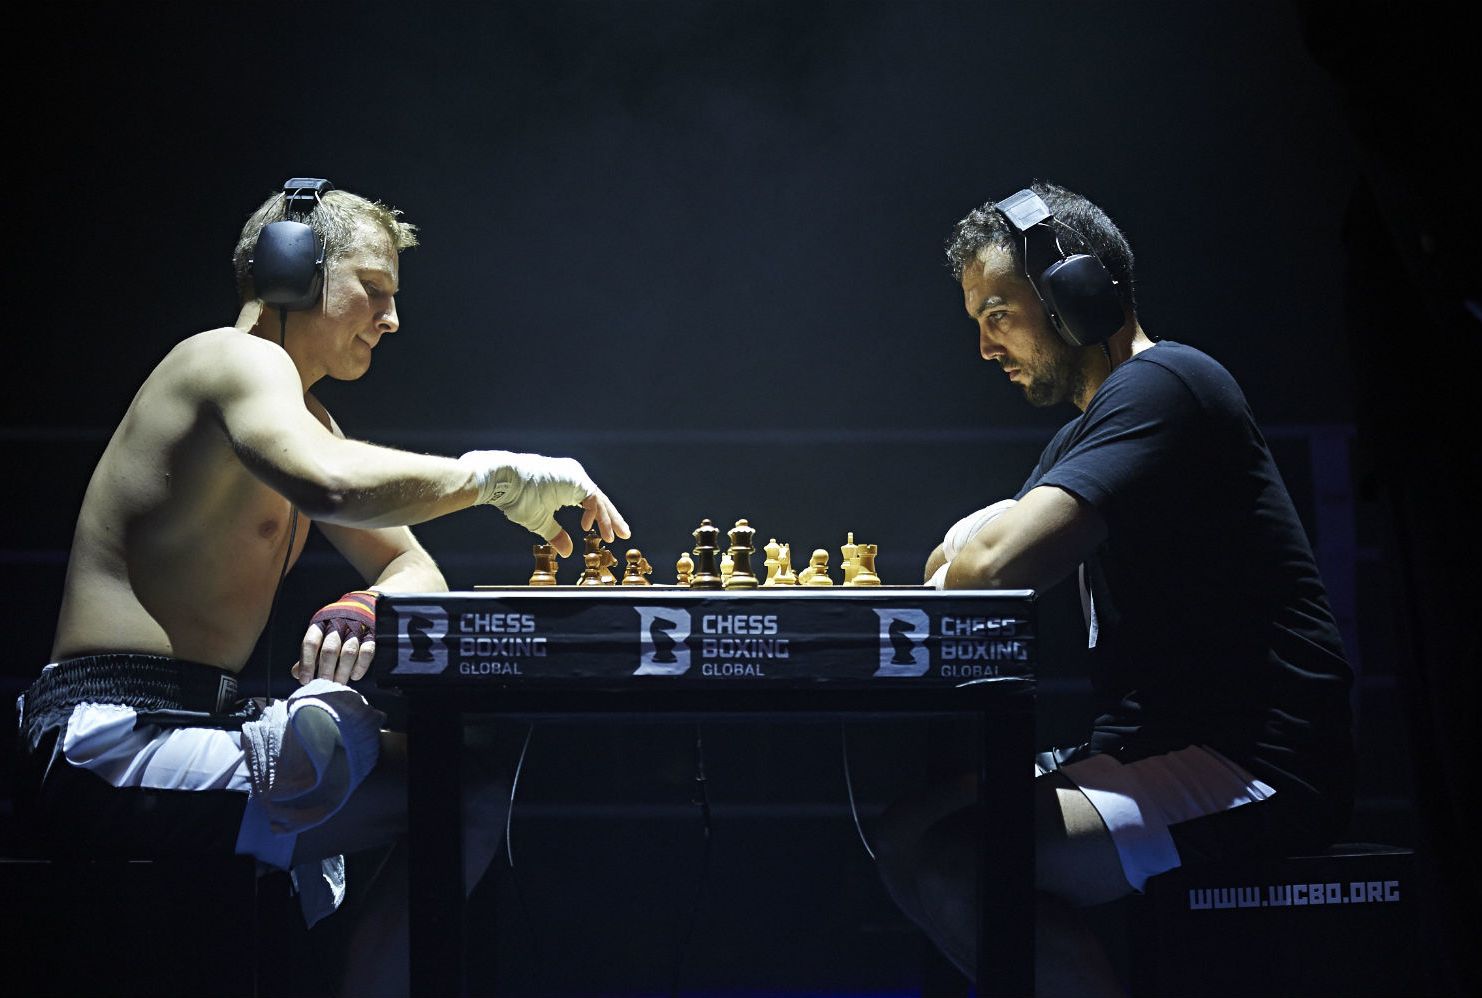 By Pawn or by Brawn: Inside Chessboxing Movement | Mental